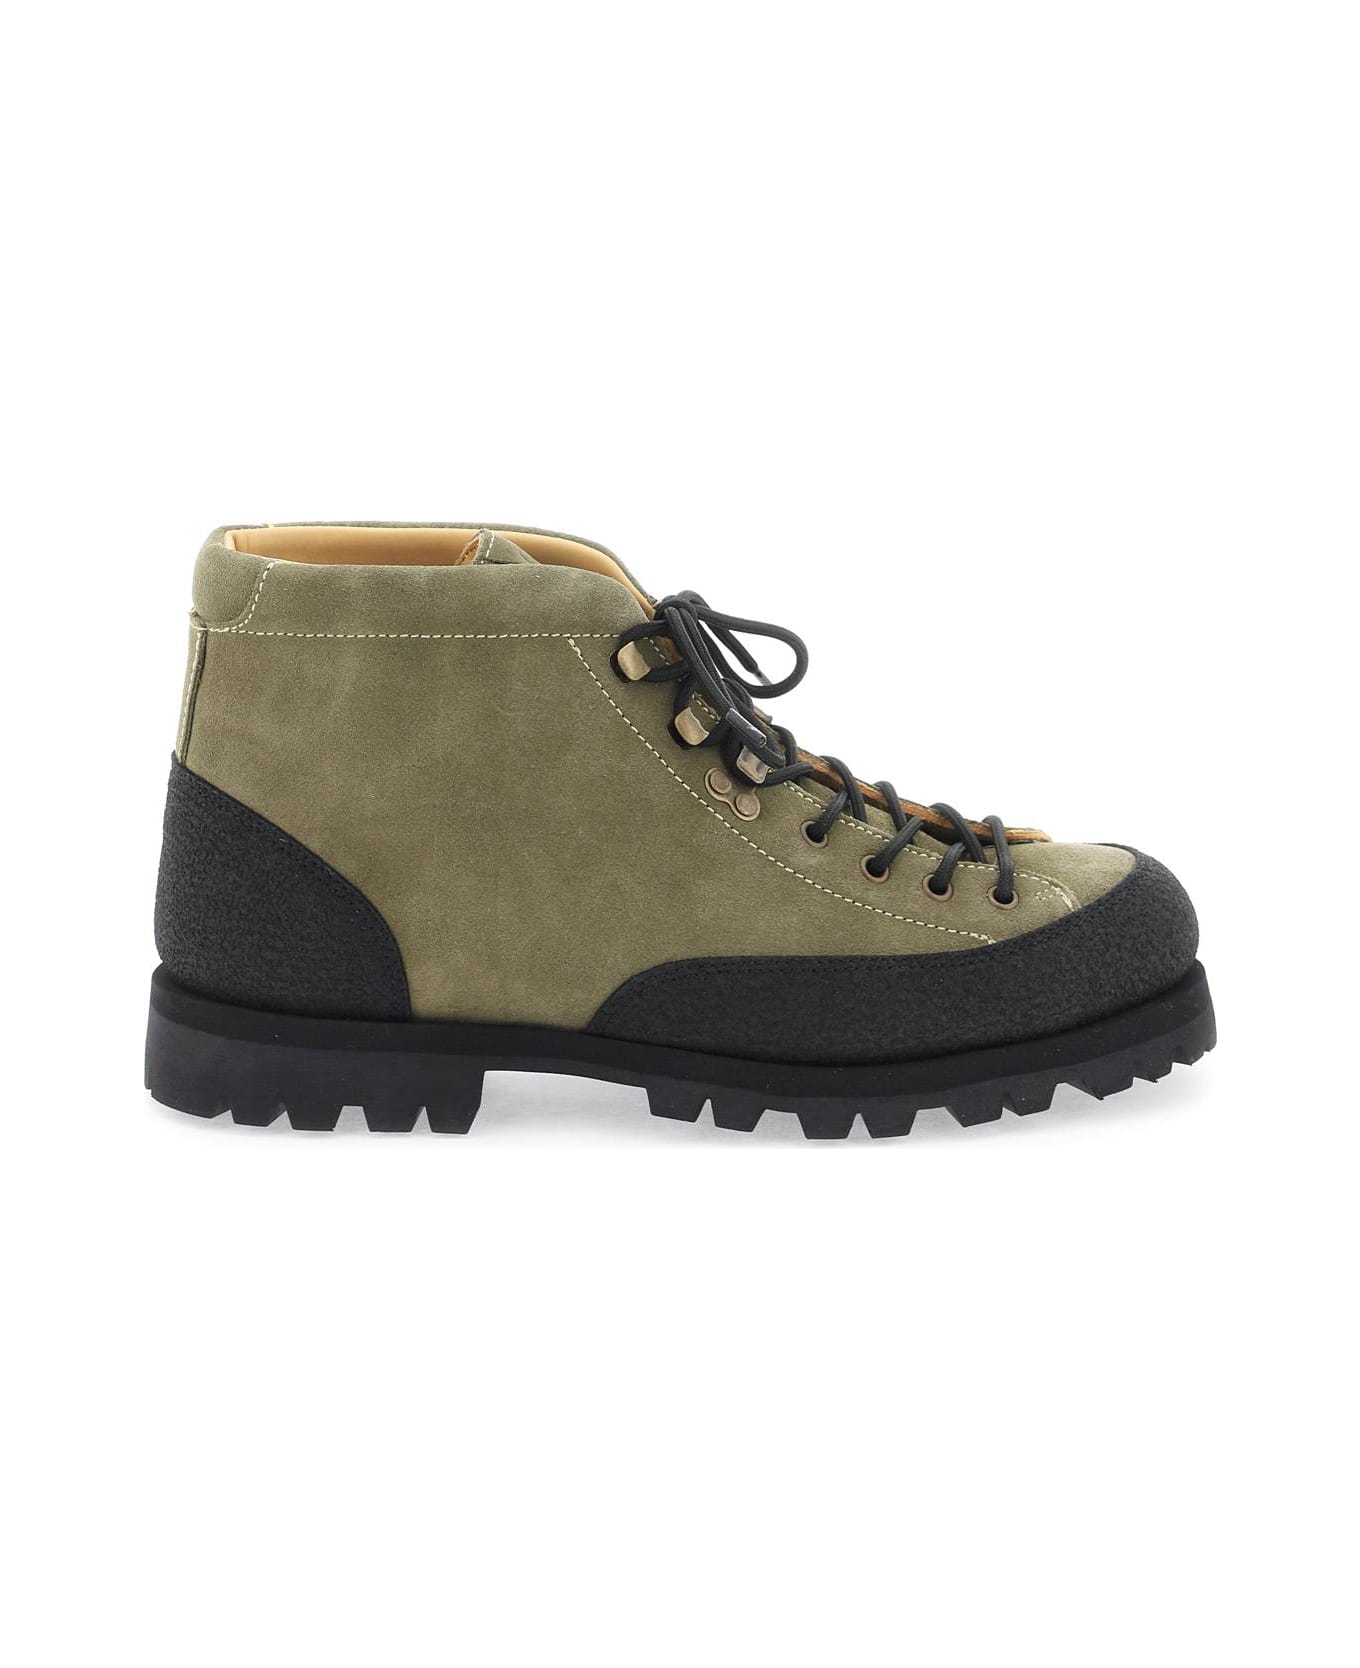 Paraboot Yosemite Boots - NOIRE VEL OLIVE (Green)